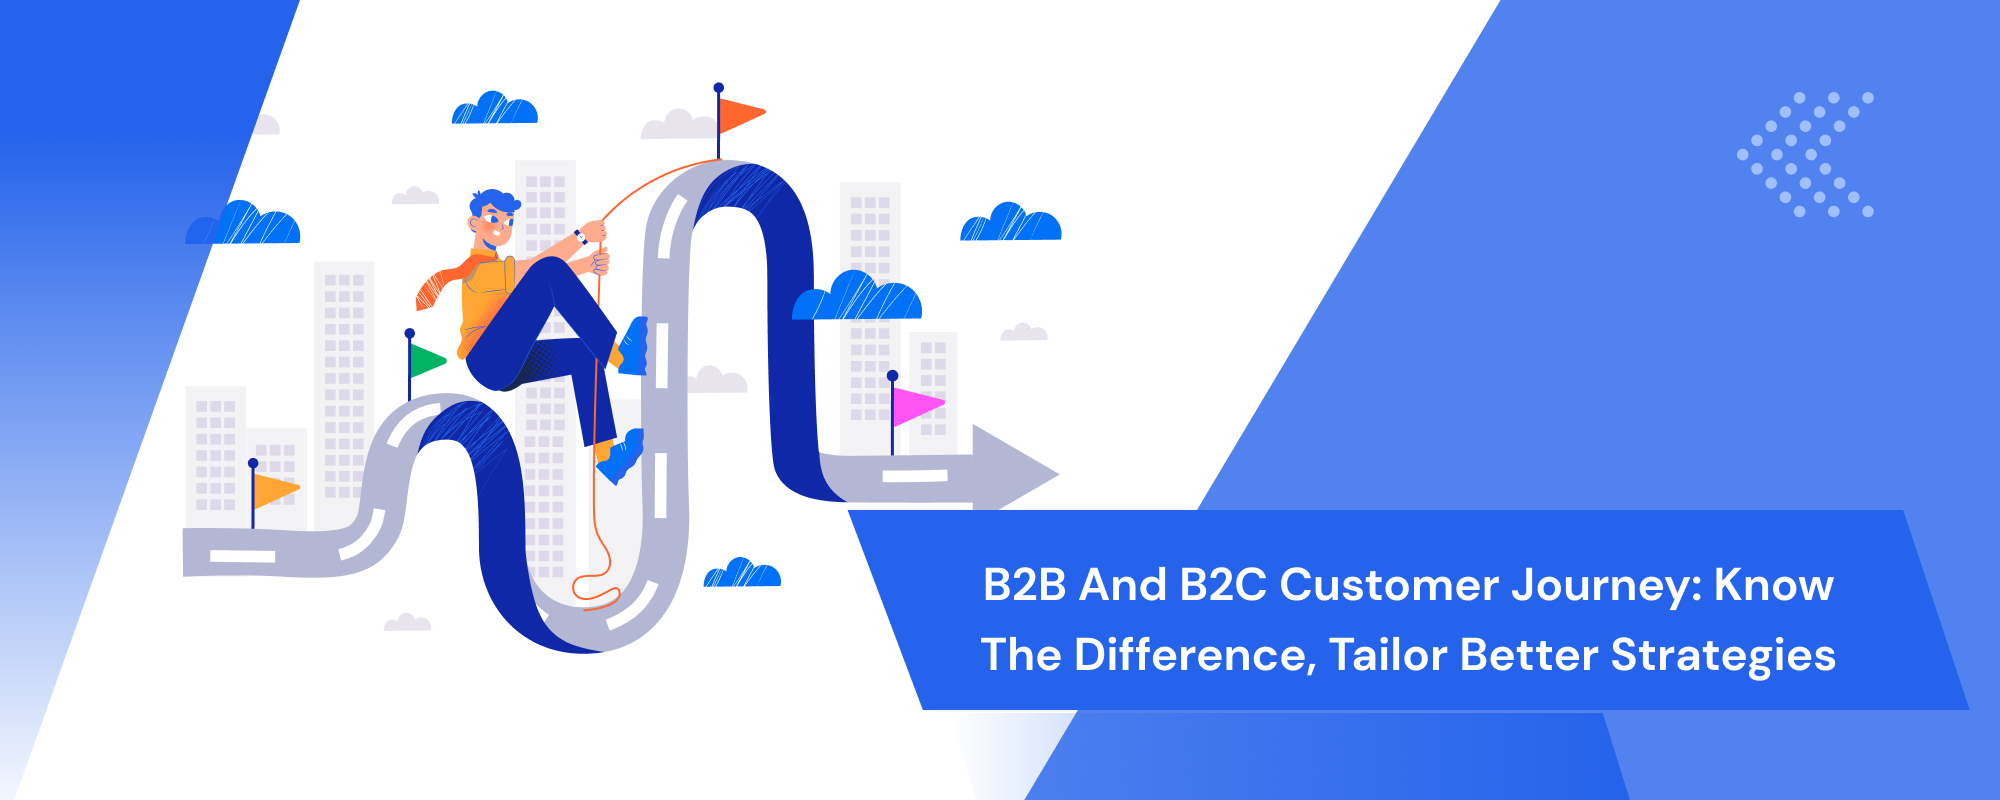 B2B and B2C Customer Journey: Know the Difference, Tailor Better Strategies!